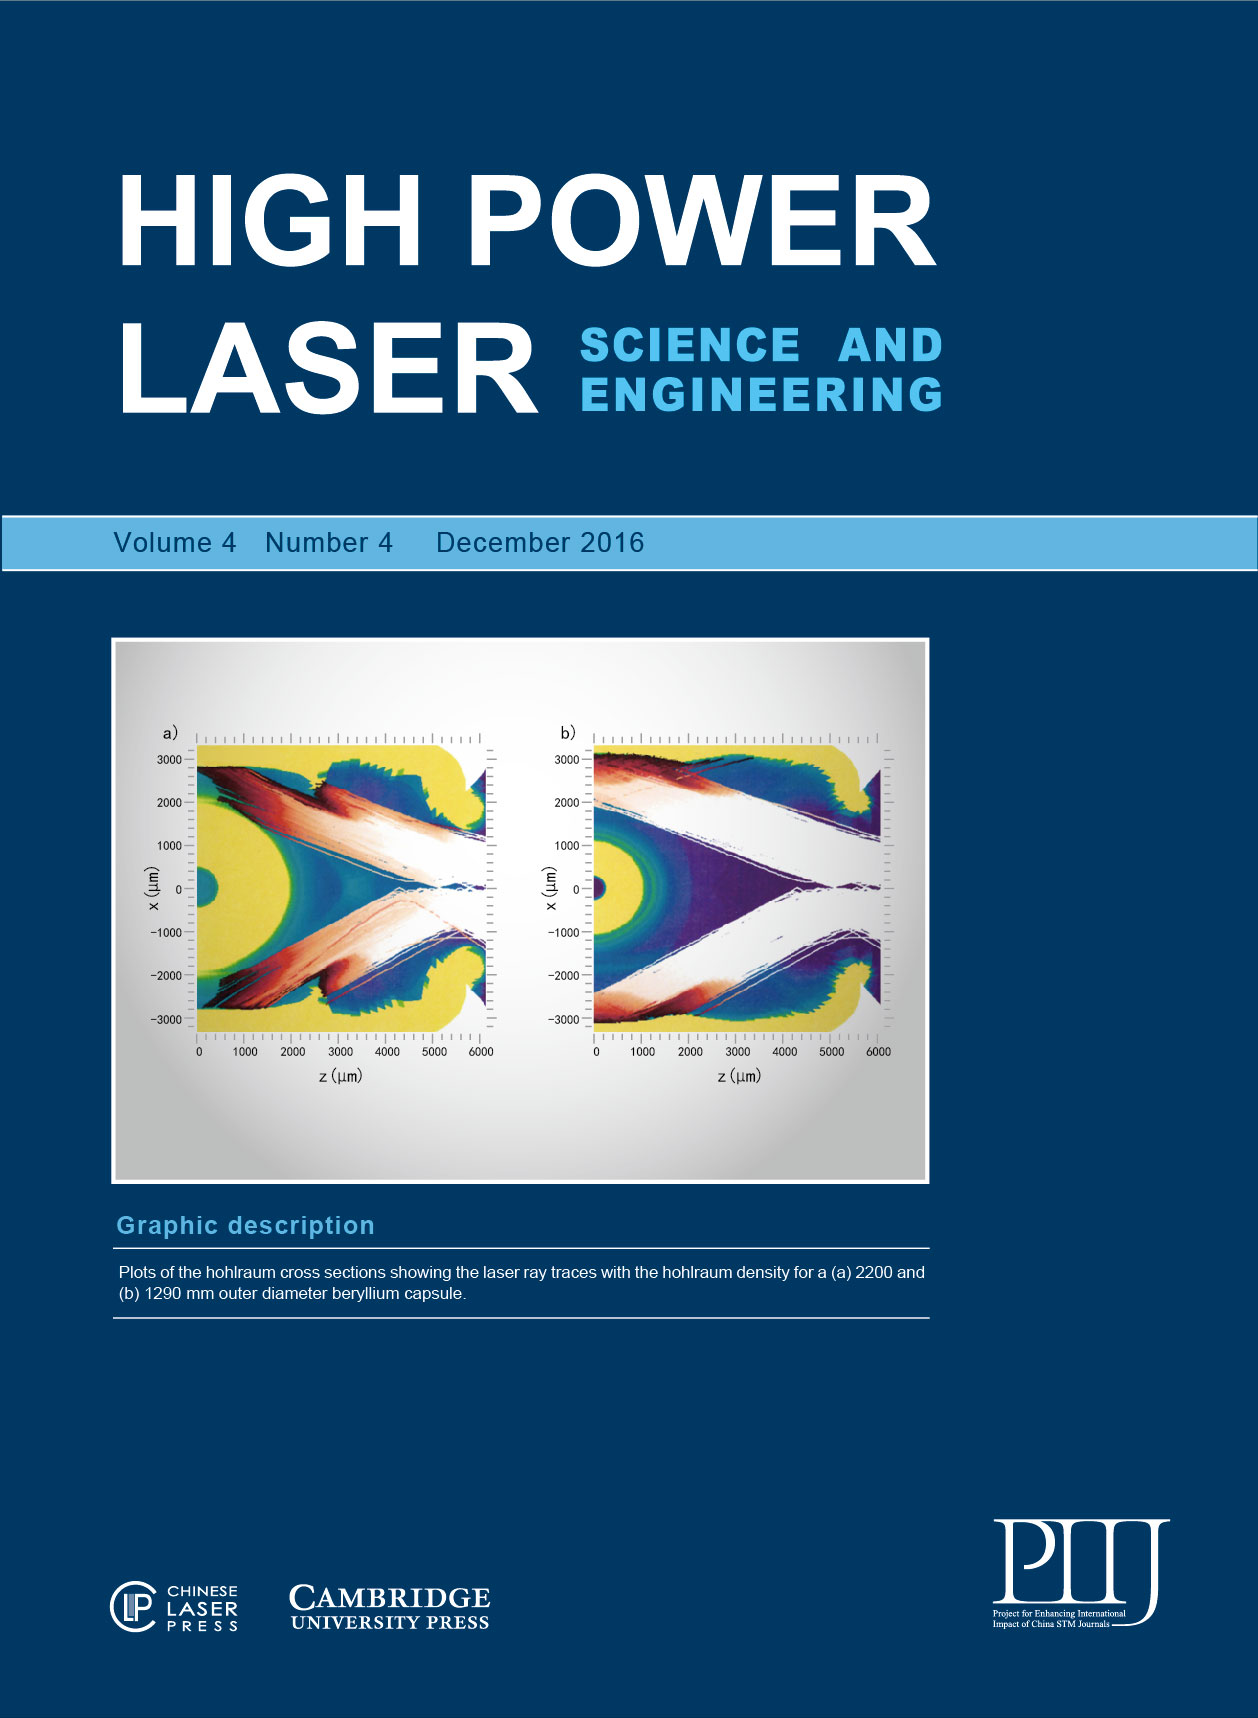 High Power Laser Science and Engineering